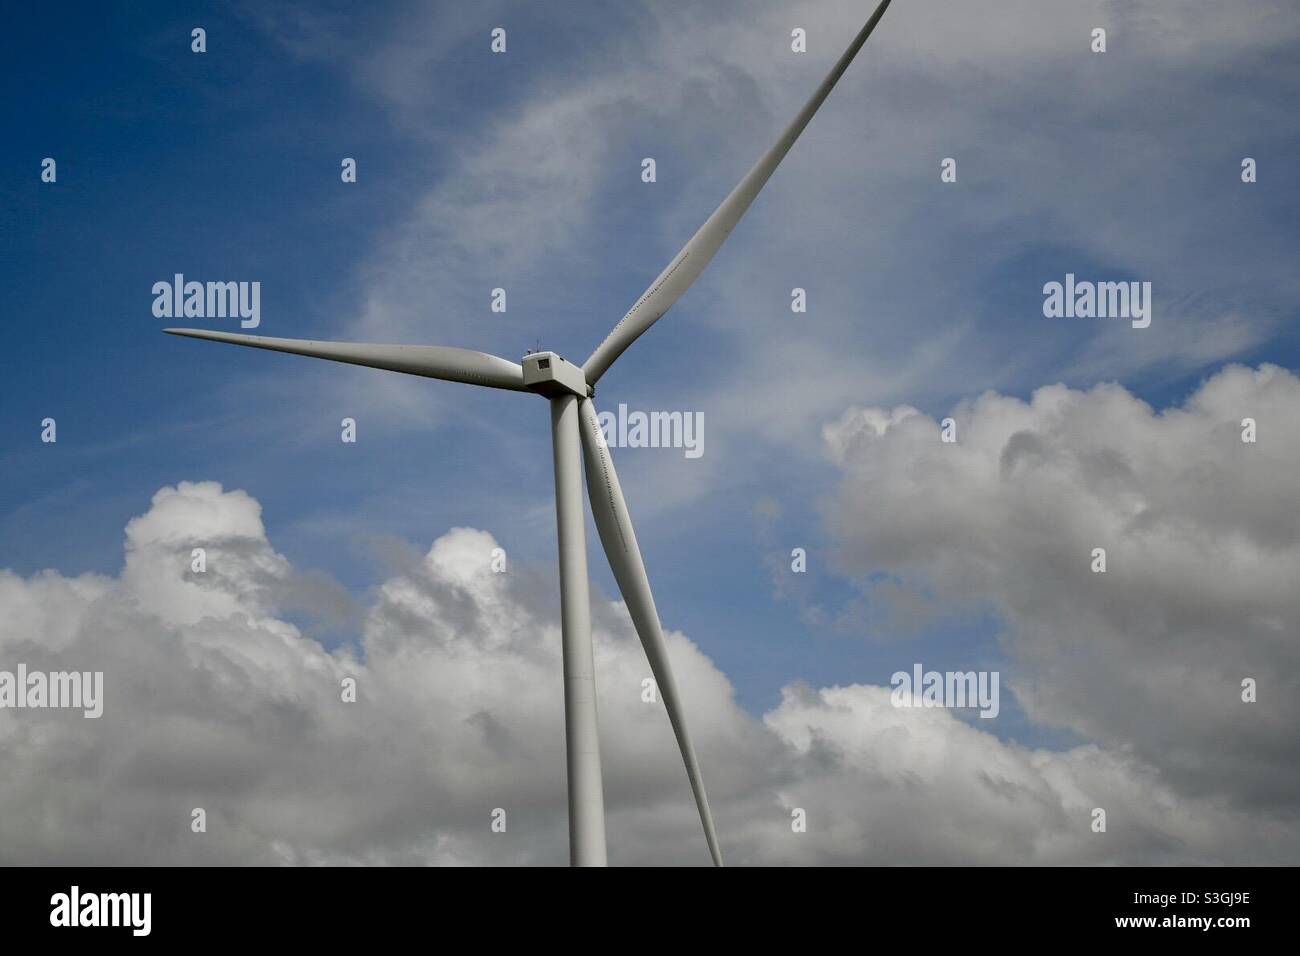 Wind turbine against a blue sky with clouds Stock Photo